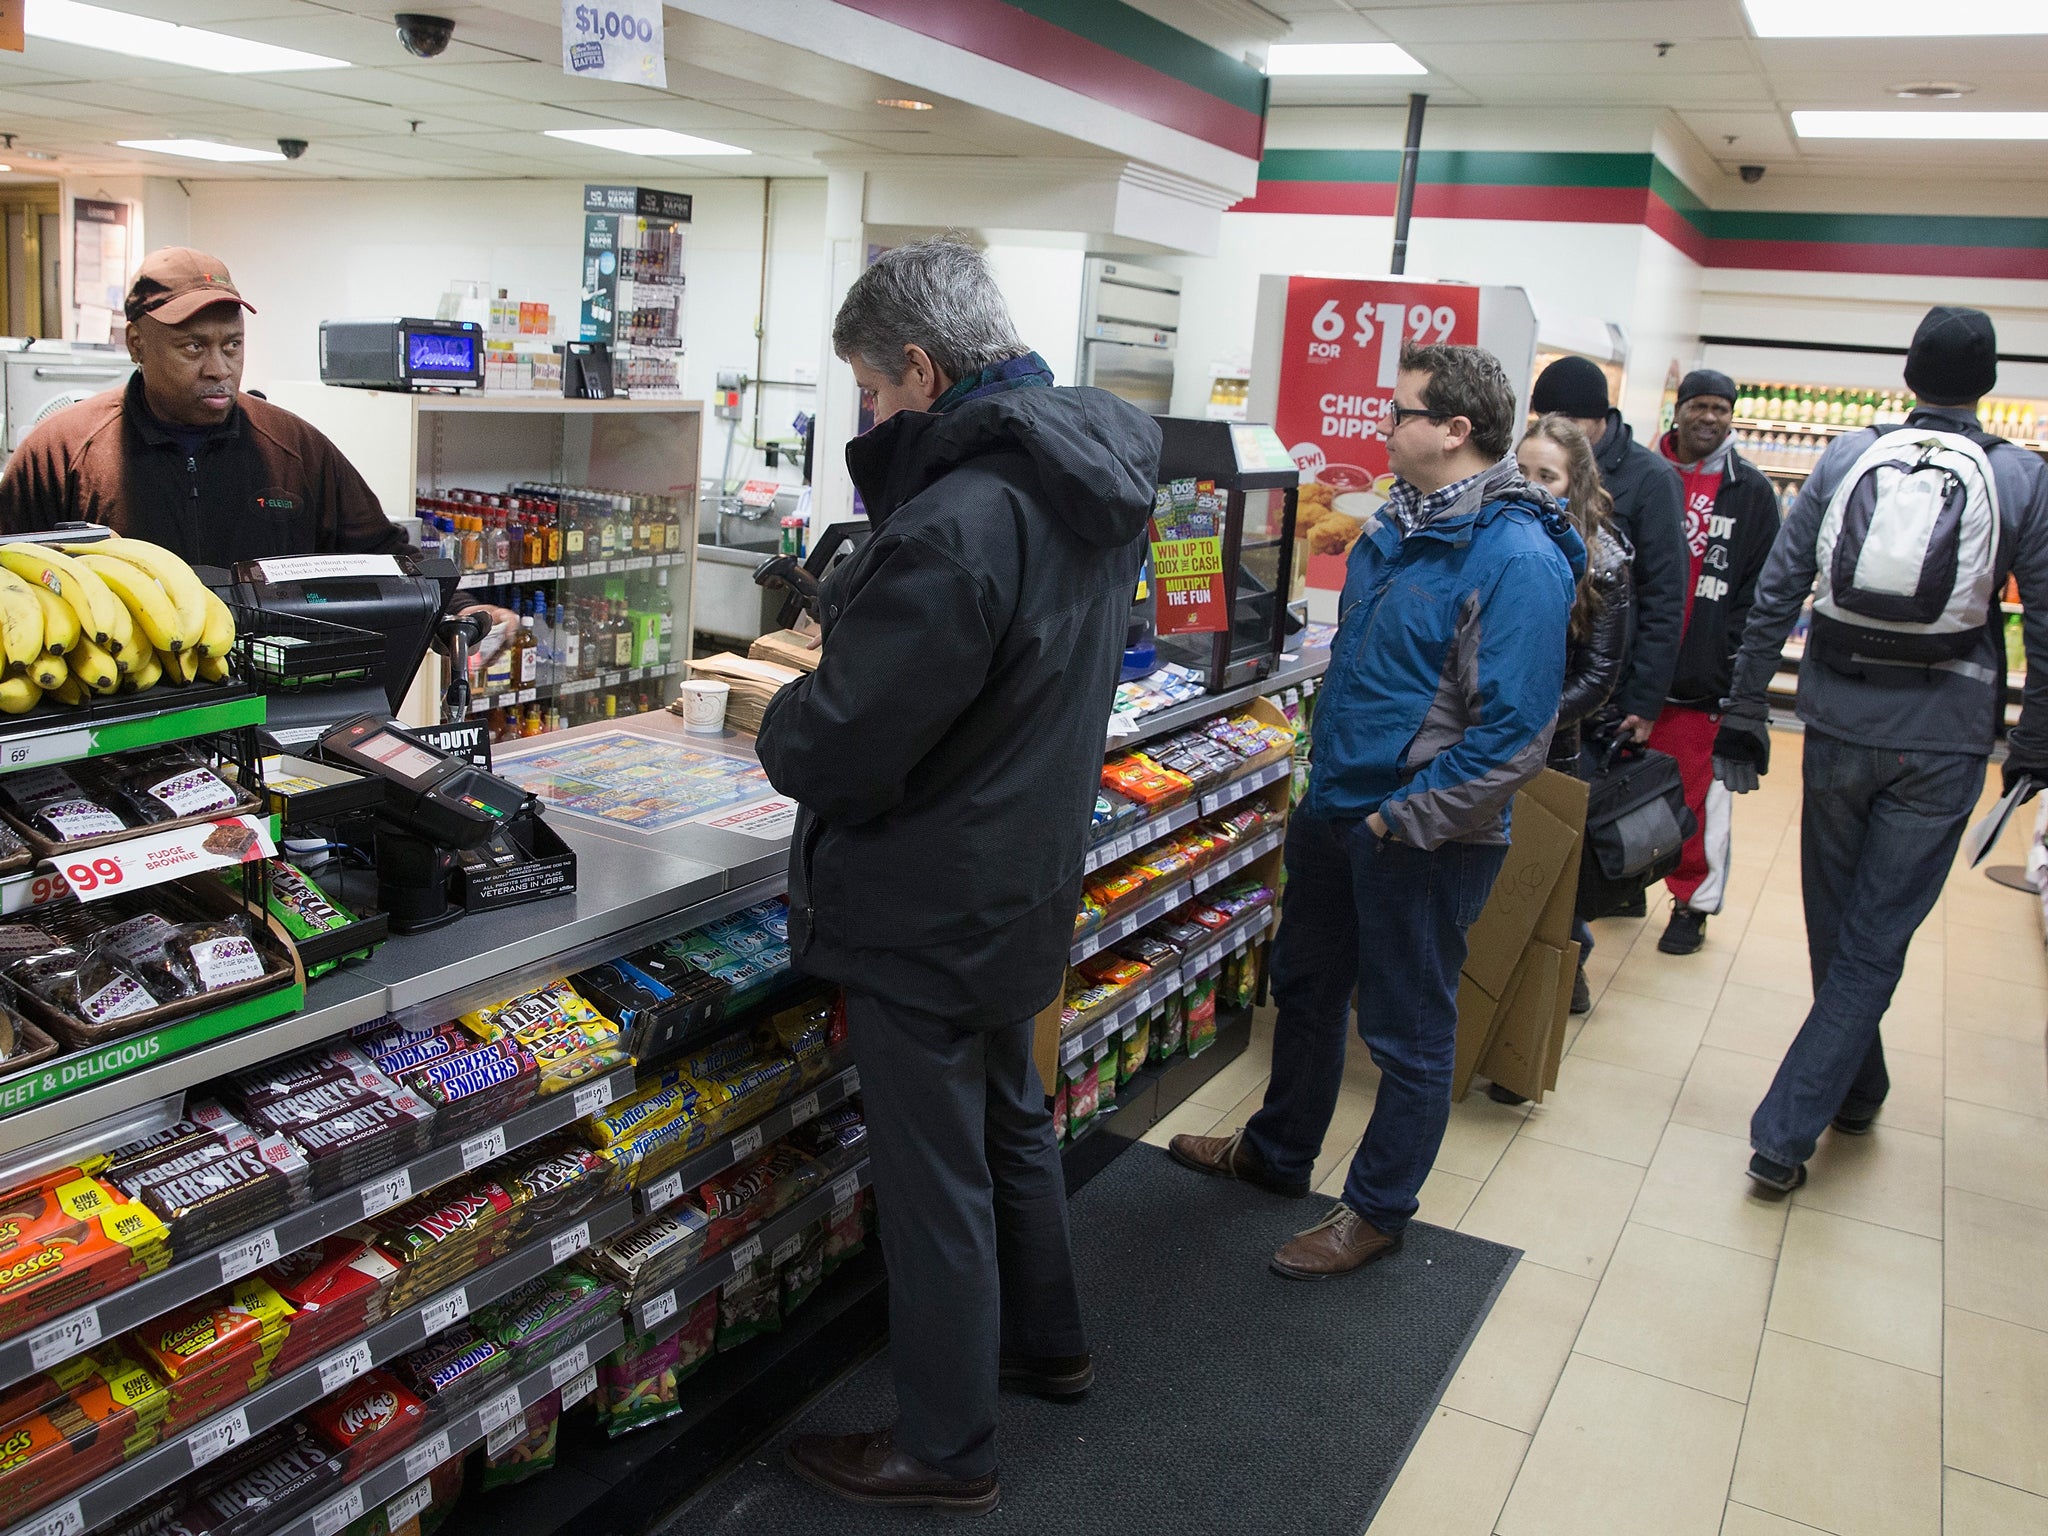 Customers await their transactions at a 7-Eleven store Scott Olson / Getty Images